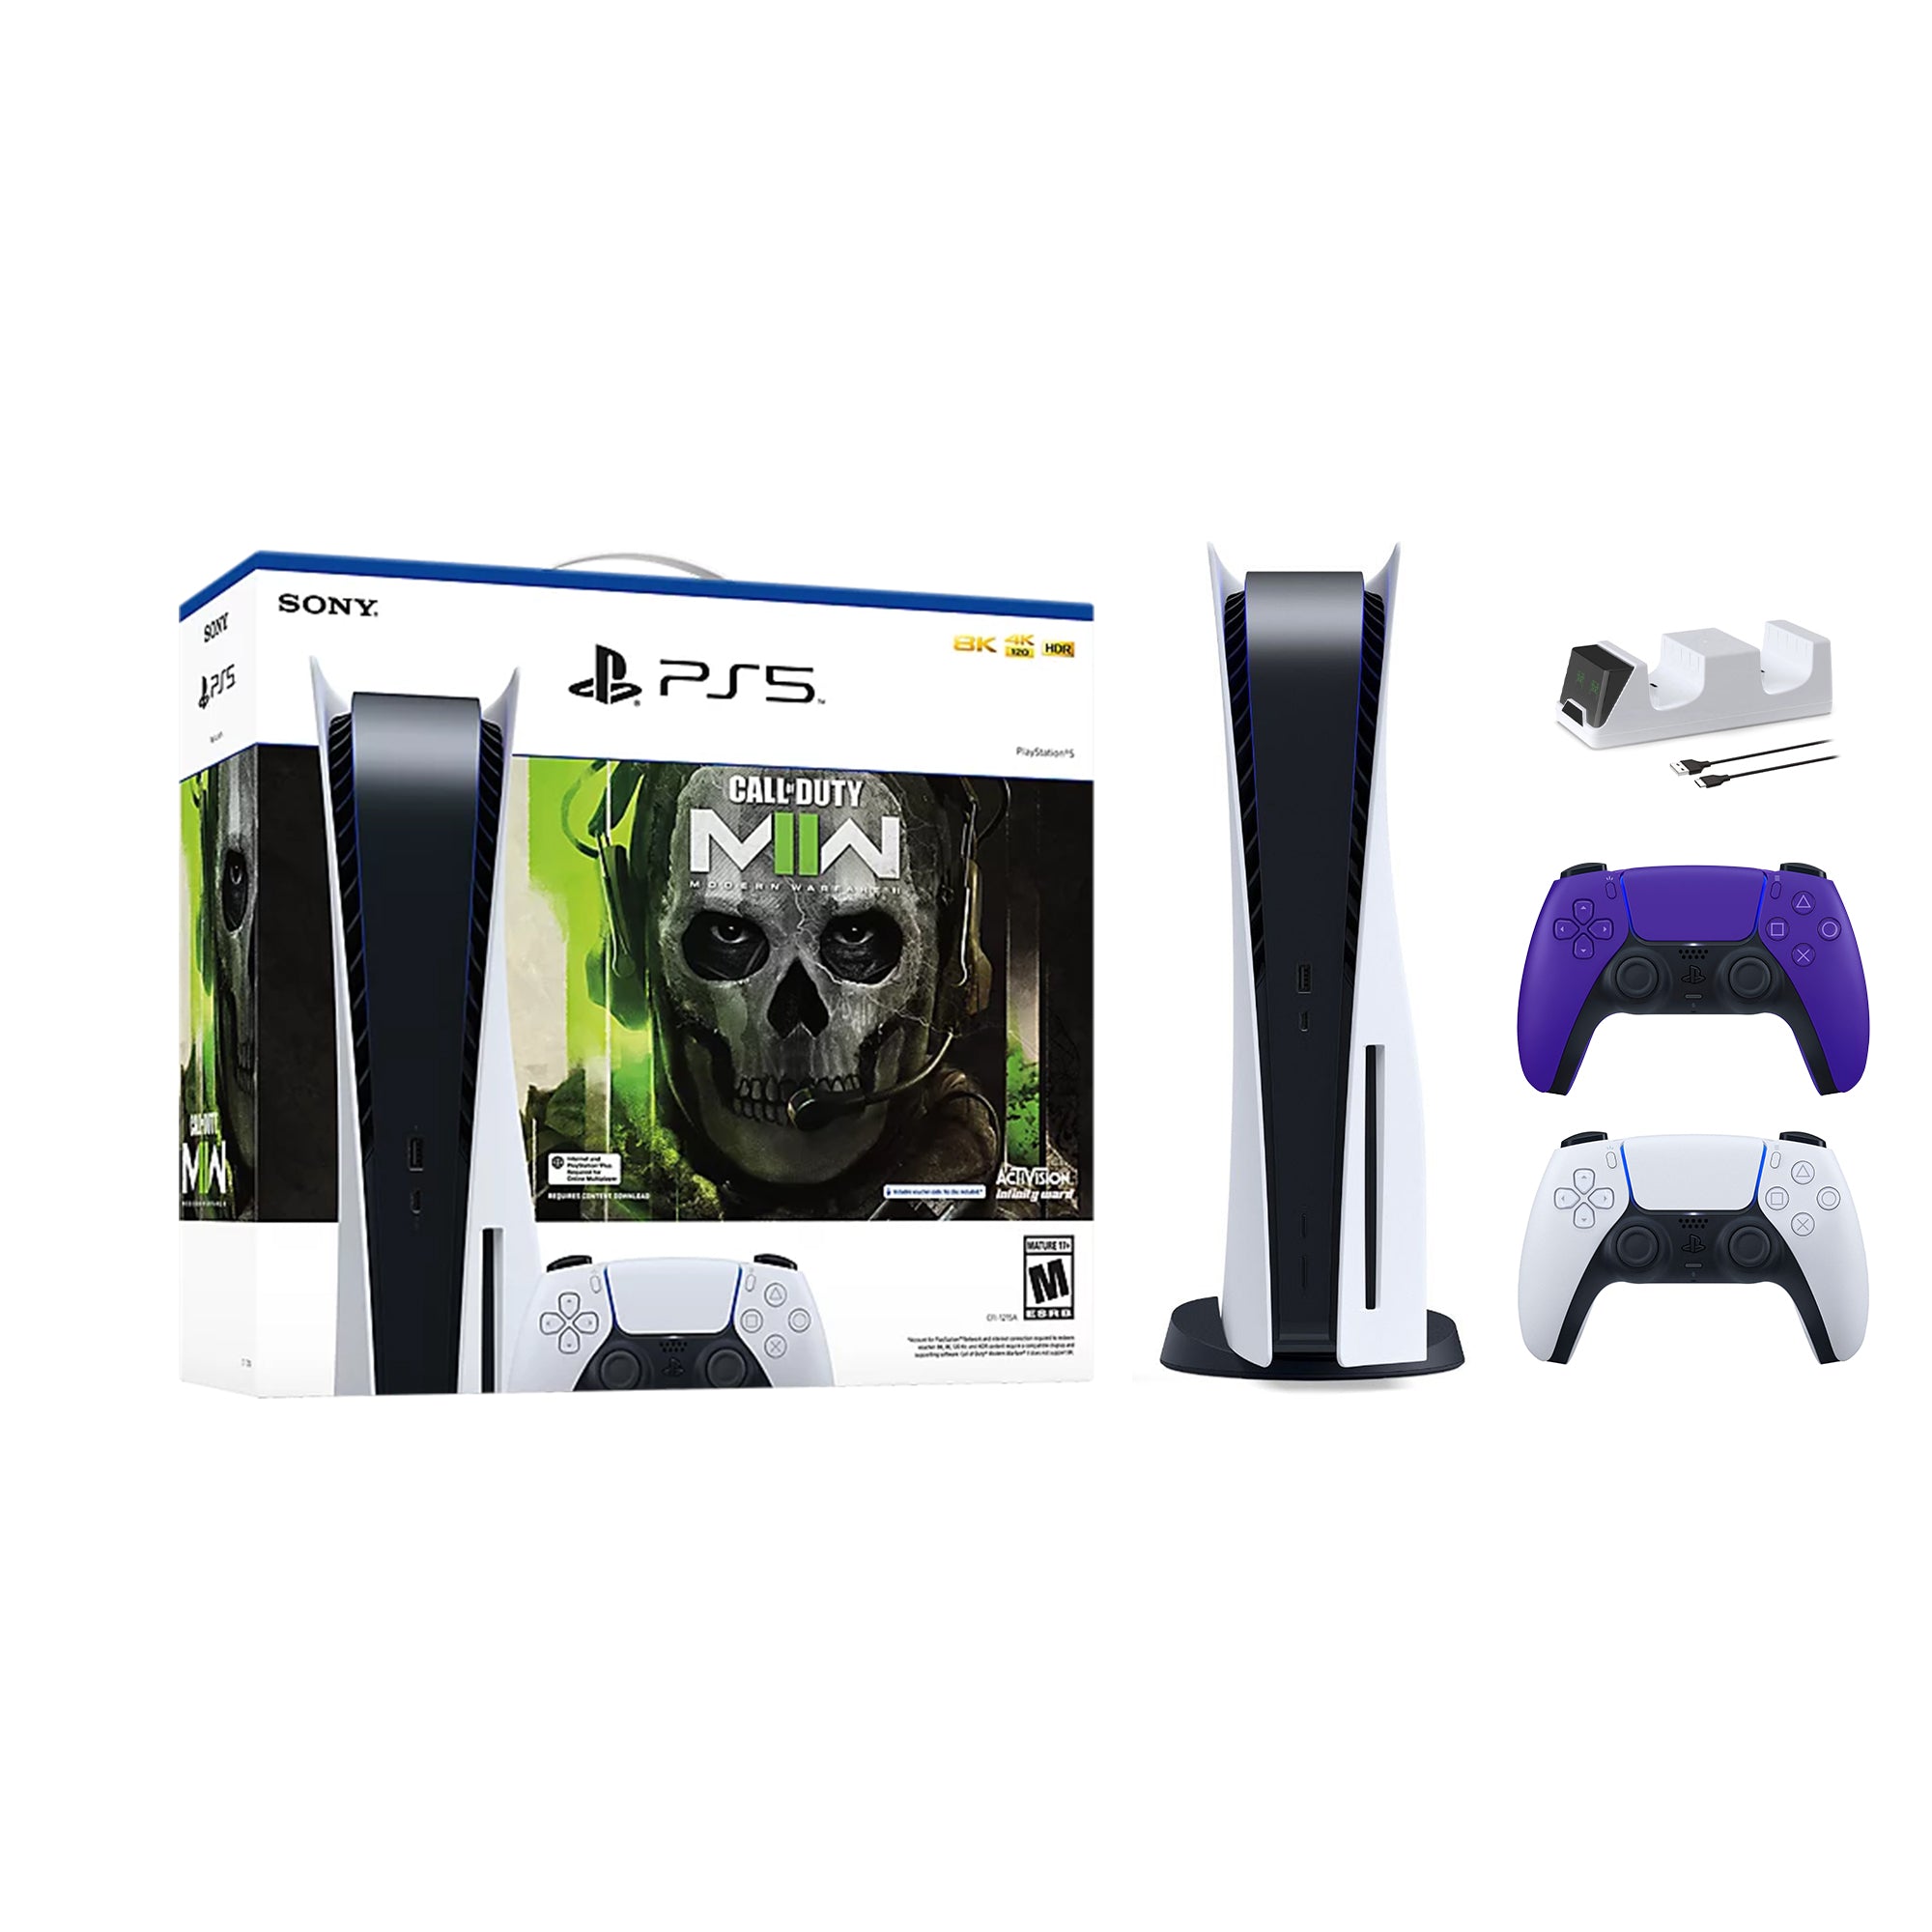 PlayStation 5 Disc Edition Call of Duty Modern Warfare II Bundle with Two Controllers White and Galactic Purple DualSense and Mytrix Dual Controller Charger